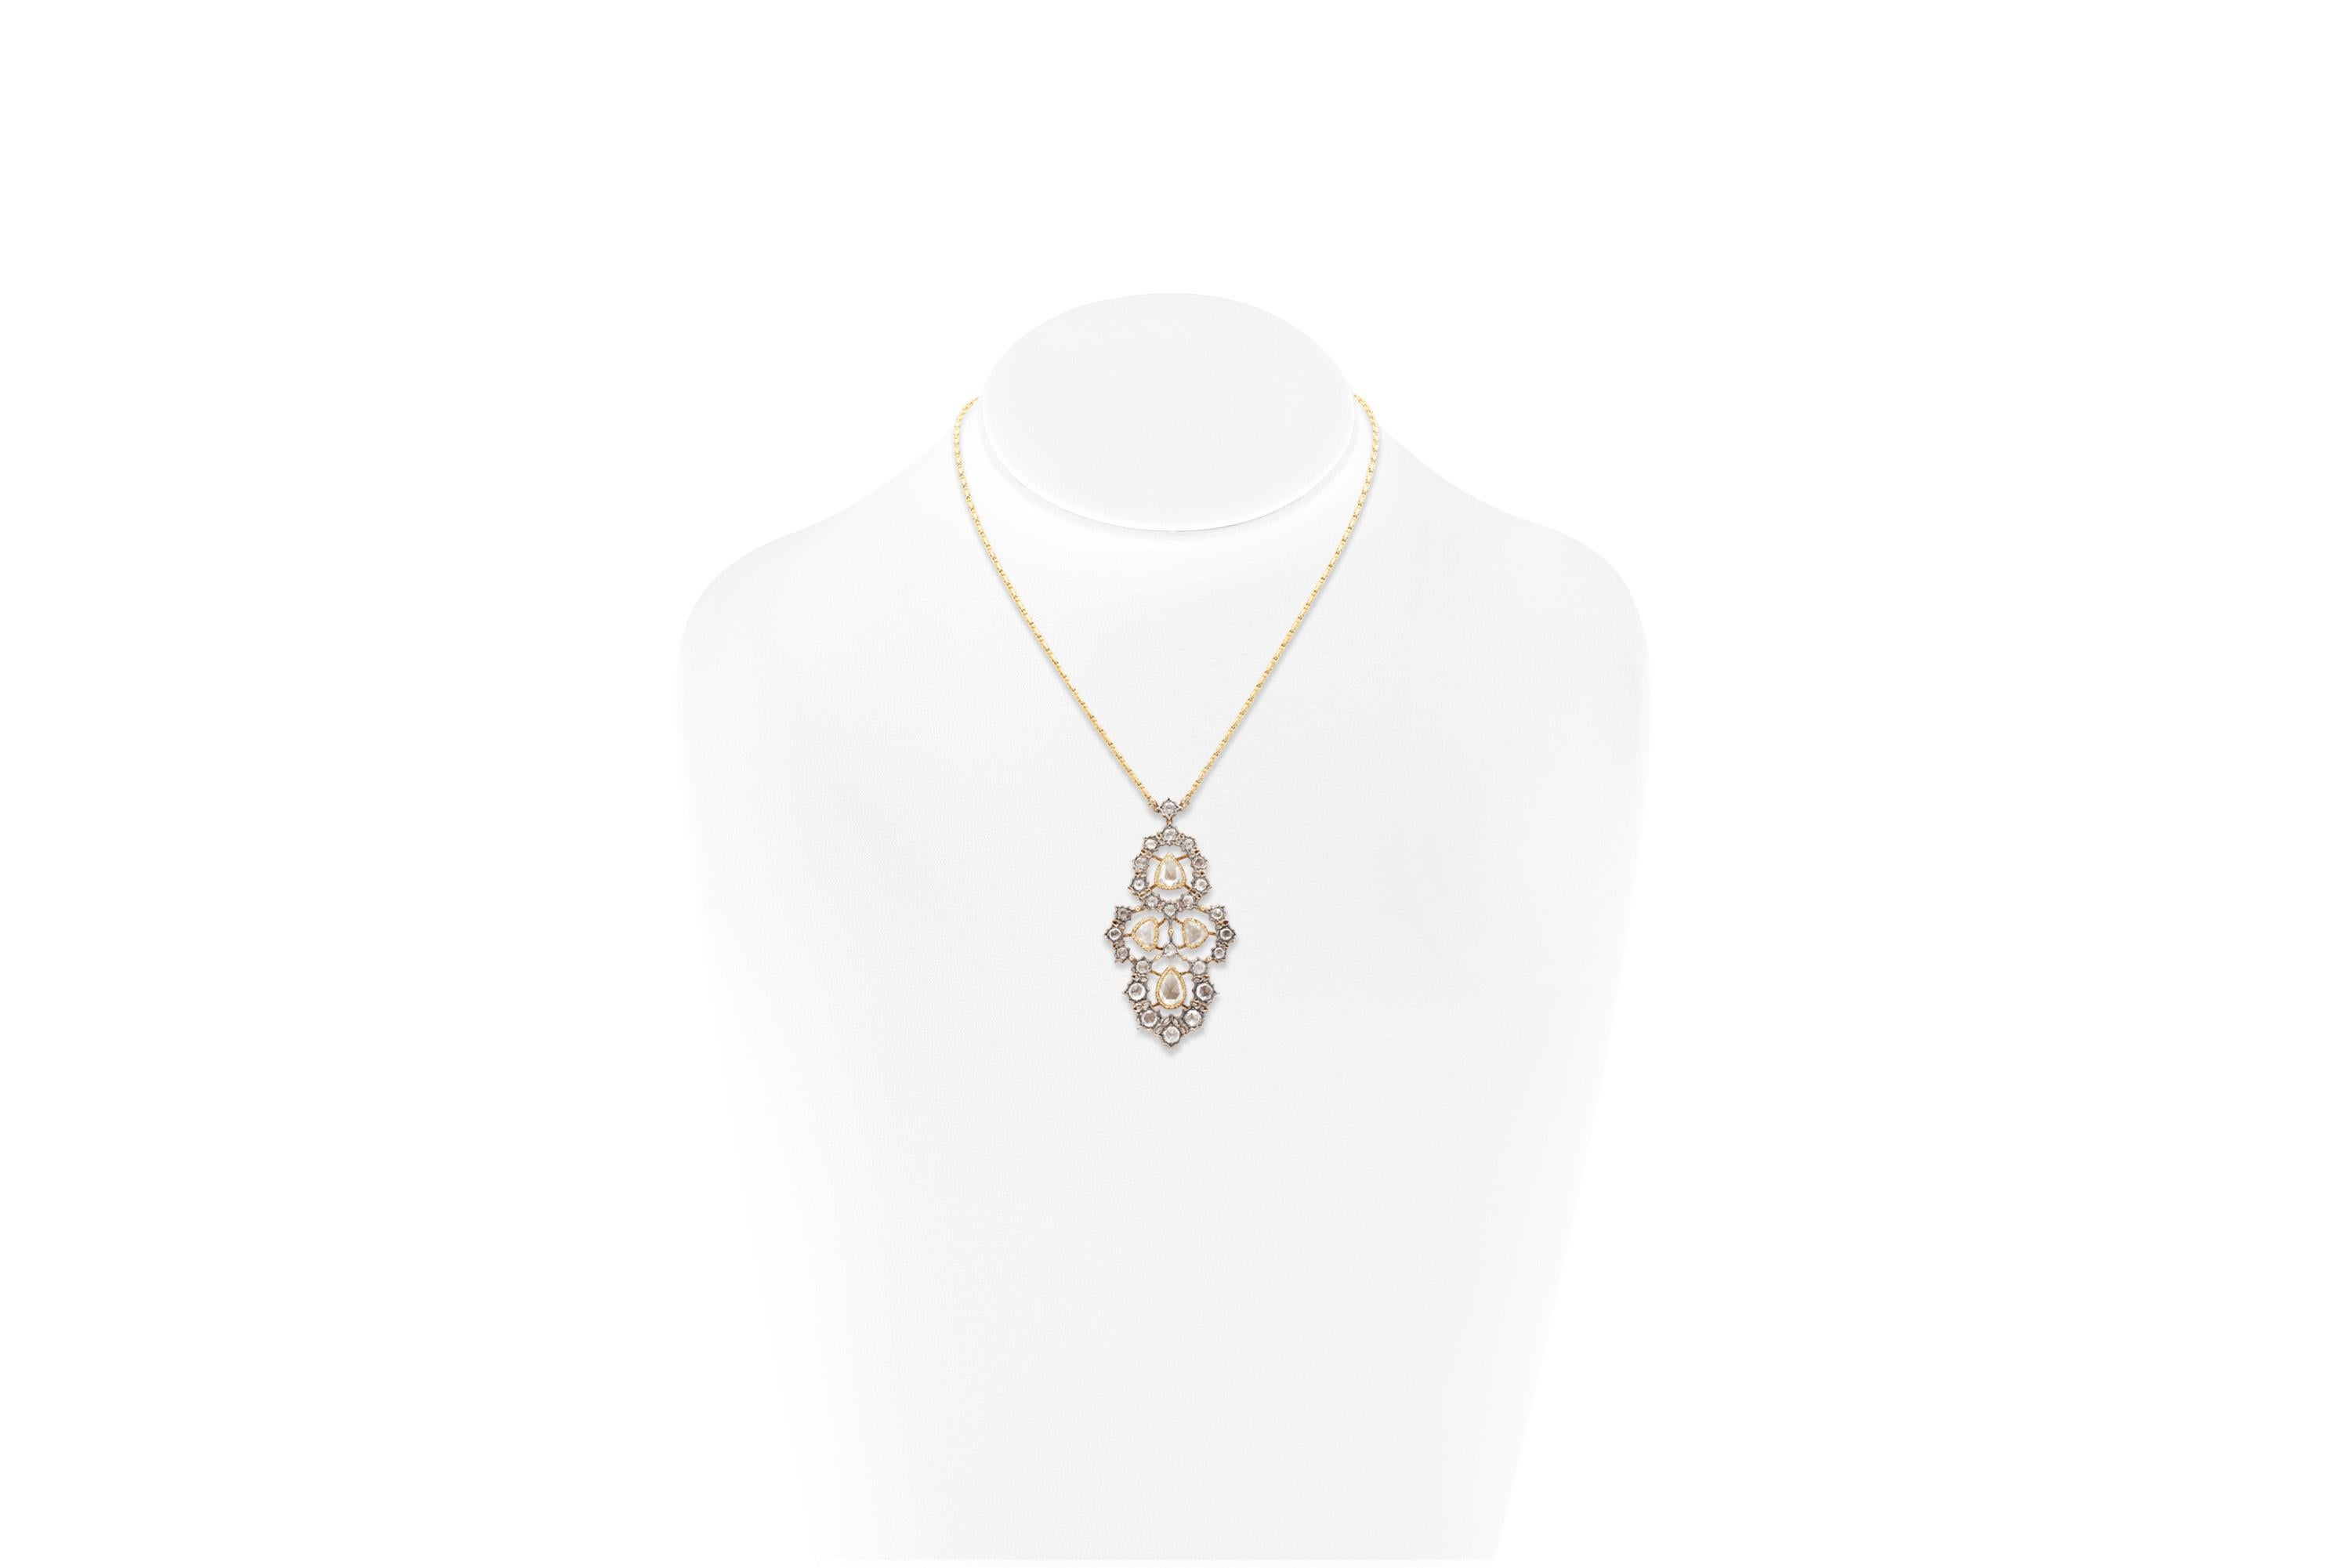 Finely crafted in 18k yellow gold and silver with Rose-cut diamonds.
Signed by Buccellati
The pendant measures 2 1/4